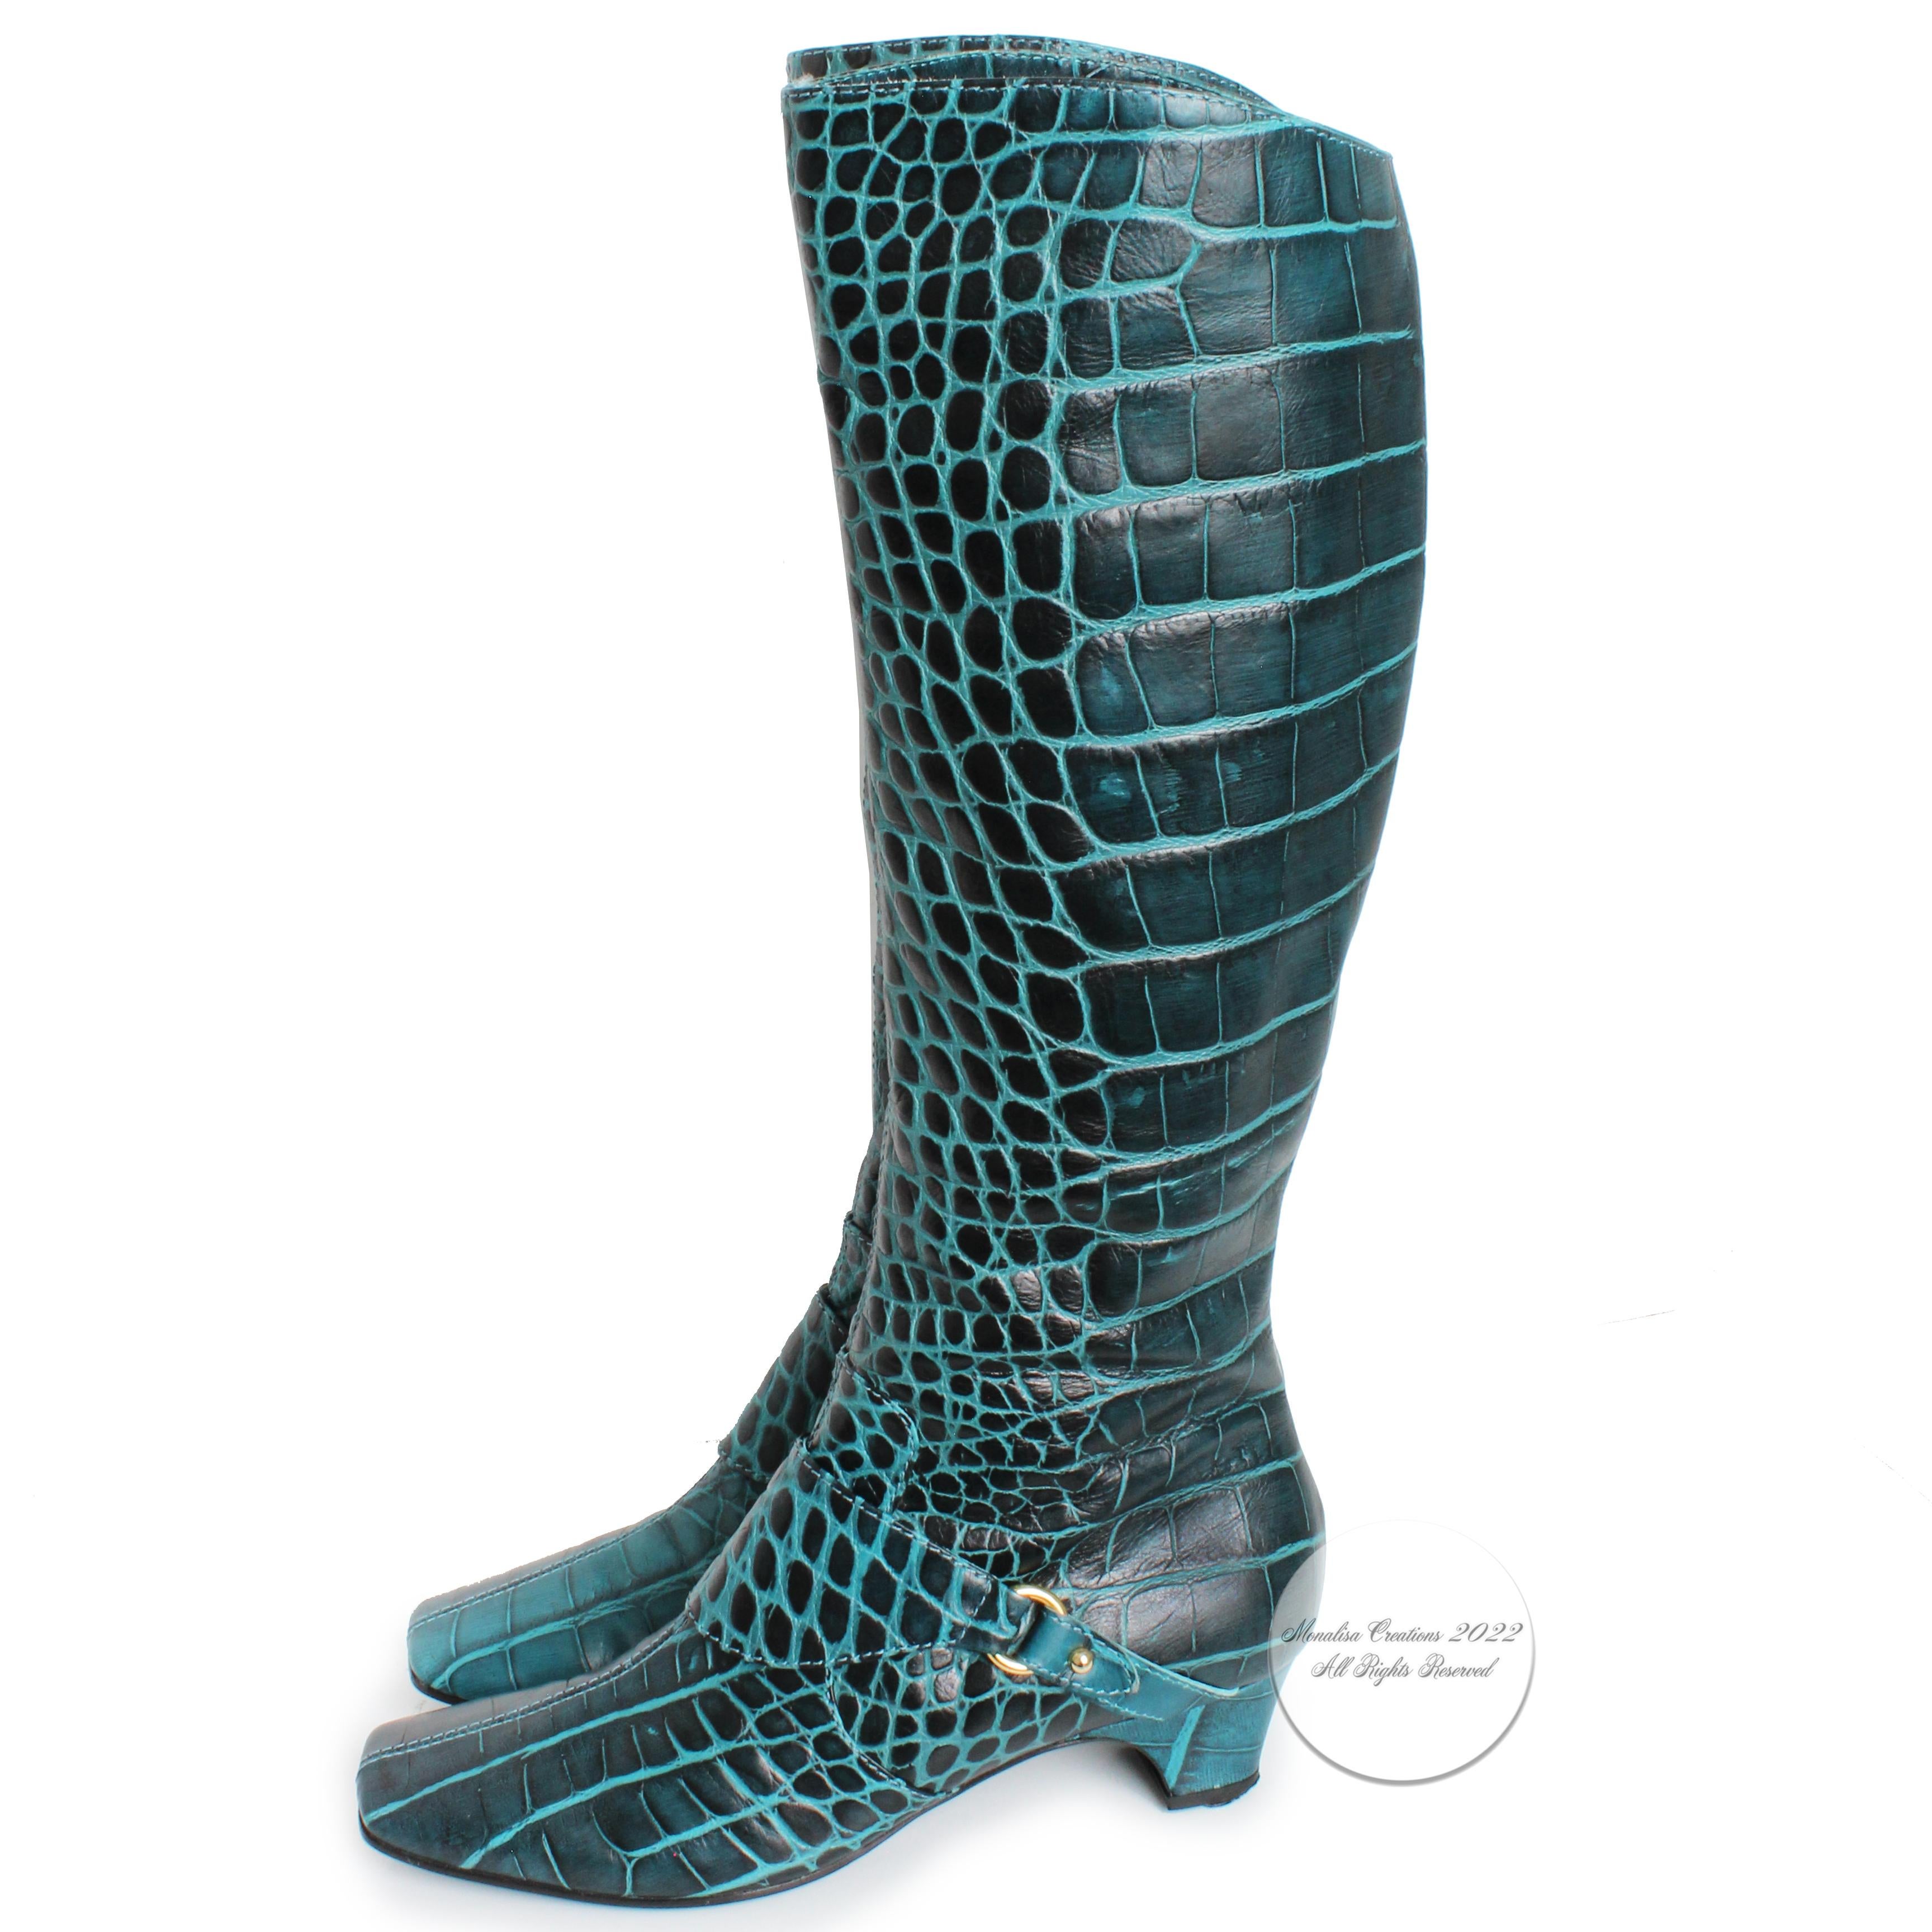 Casadei Boots Croc Embossed Leather Green Blue Made in Italy Vintage Size 9.5  1